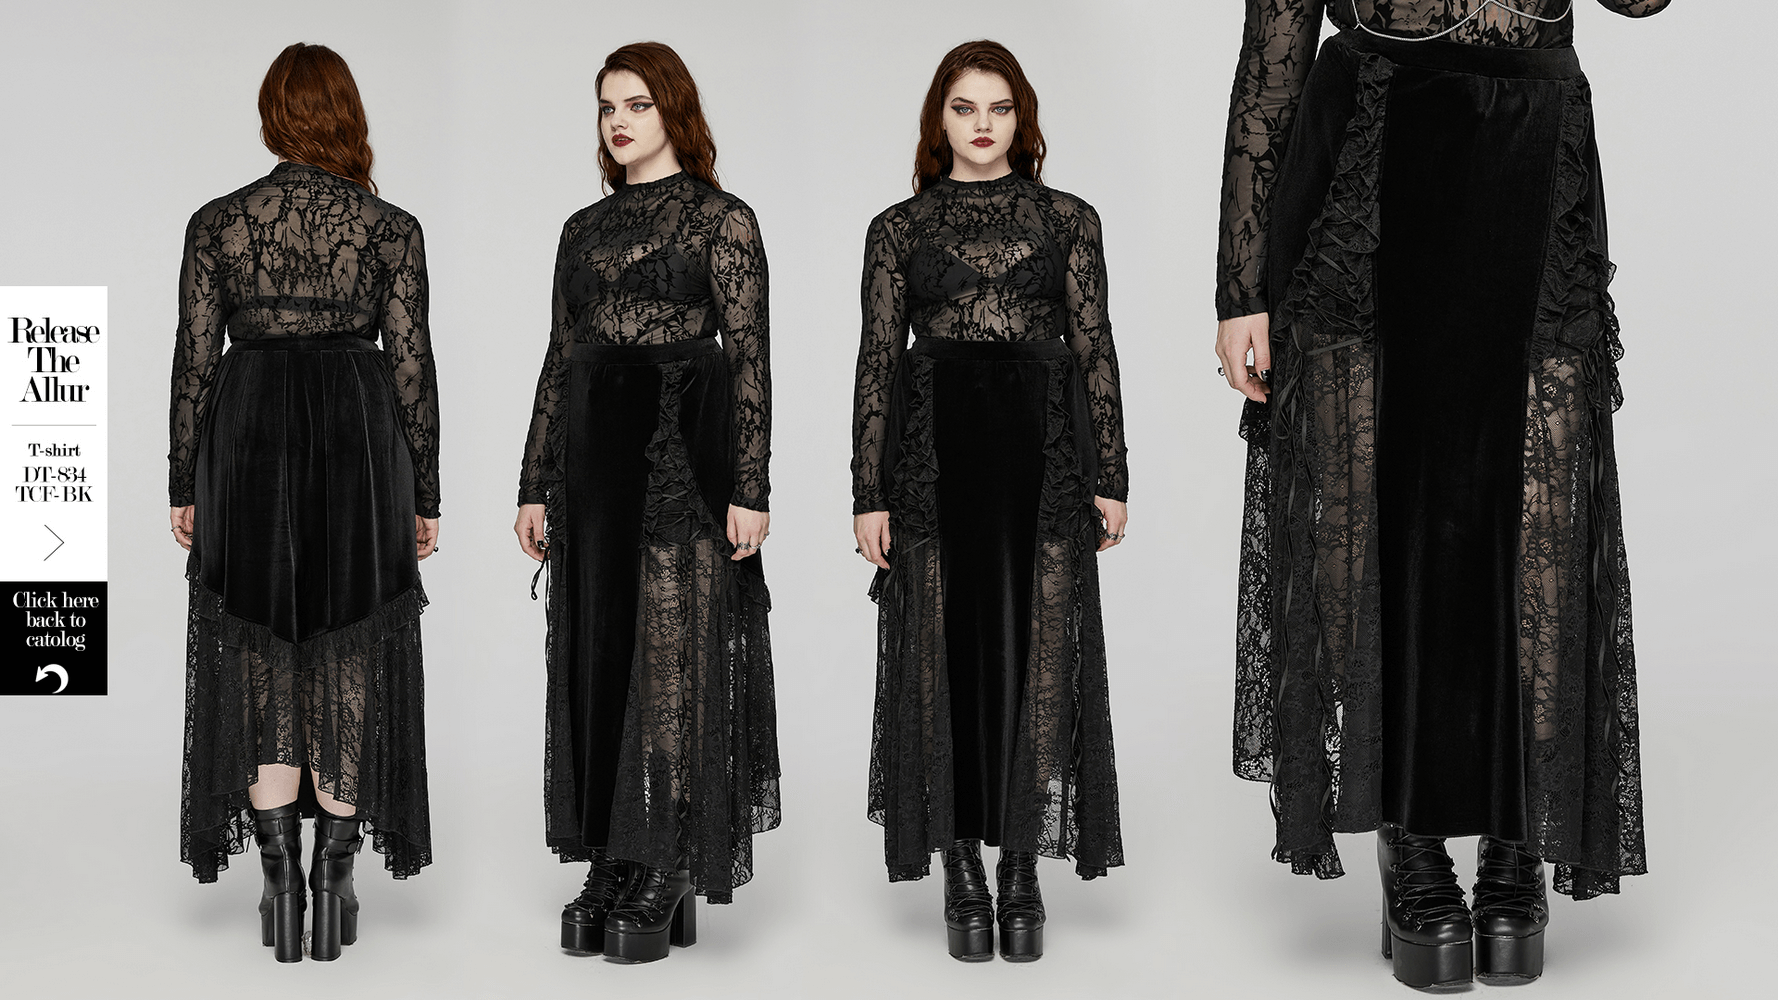 Gothic Lace-Trim Velvet Long Skirt With Lacing Detailing